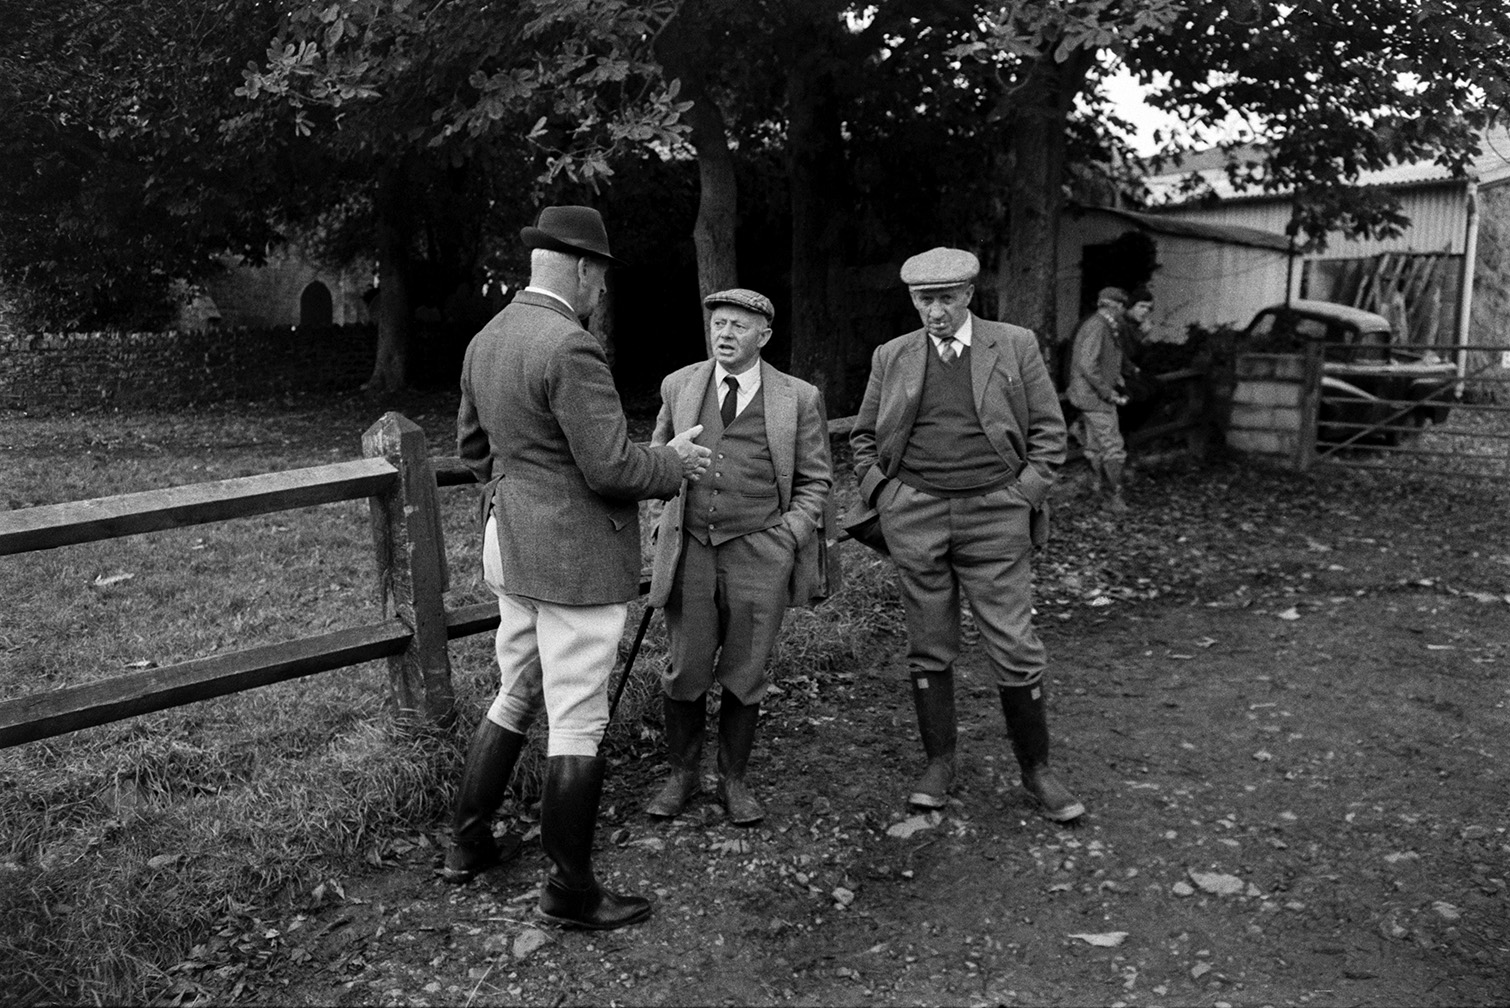 Three men talking at the Tavistock Staghound hunt meet at a farm in Lapford. They are stood by a wooden fence under trees. Farm buildings and gravestones in a churchyard can be seen in the background.